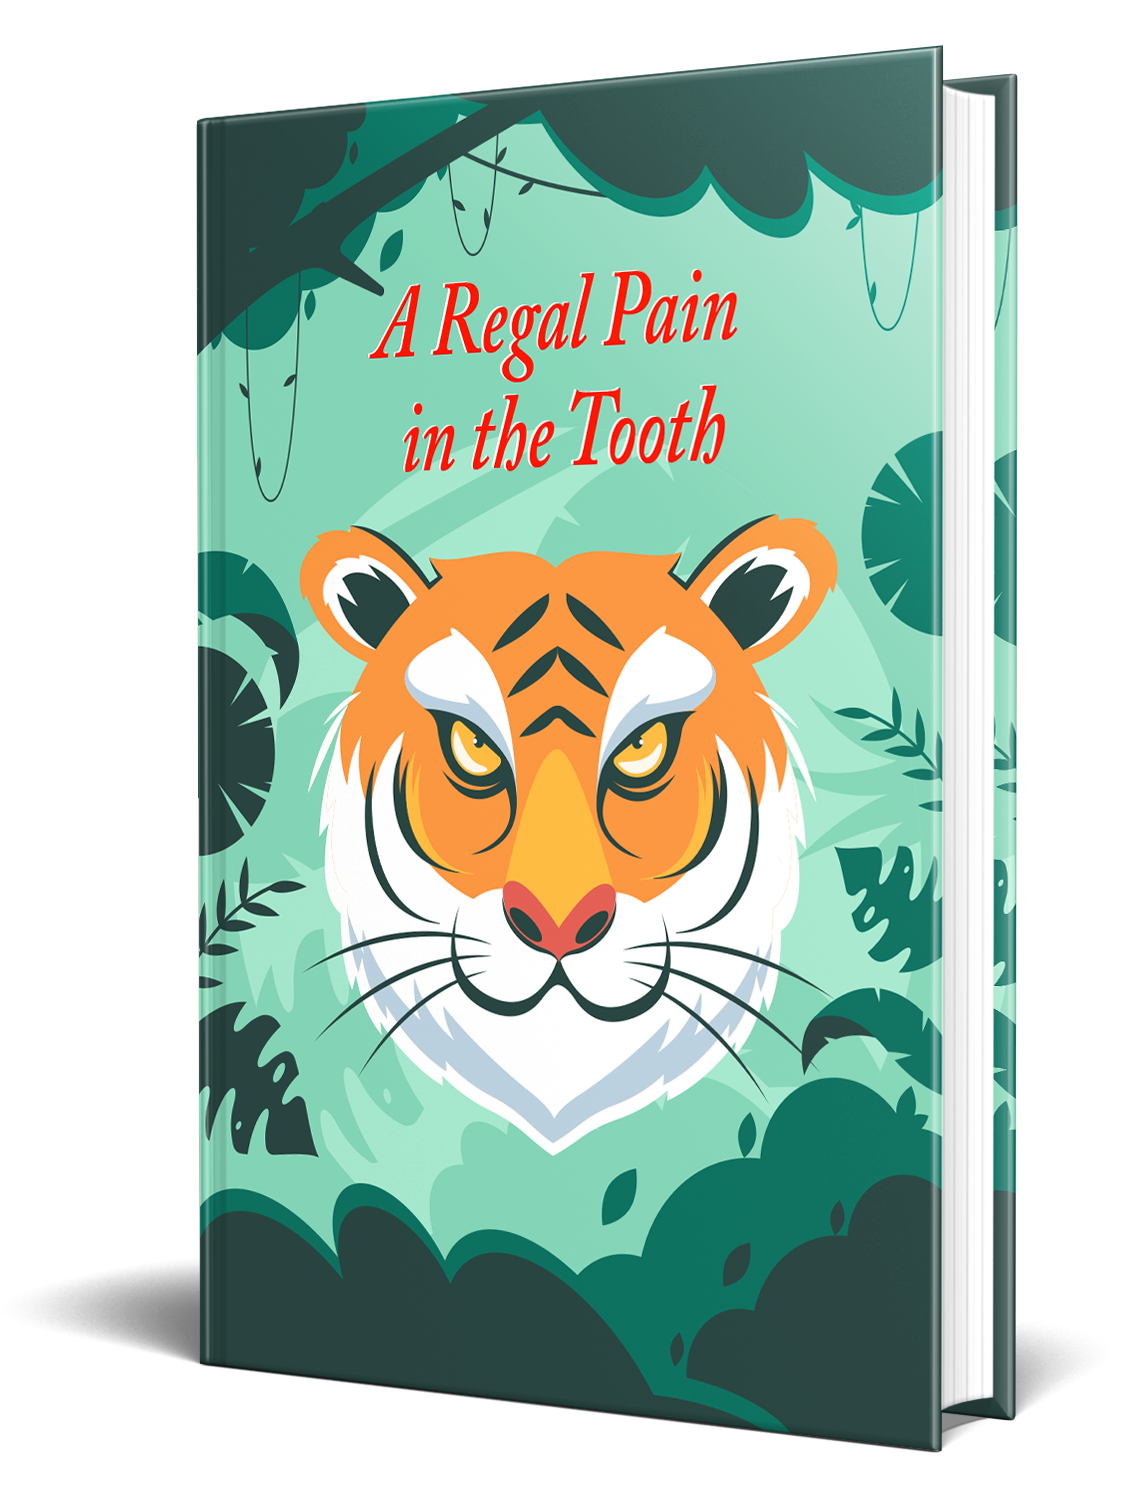 A Regal Pain in the Tooth